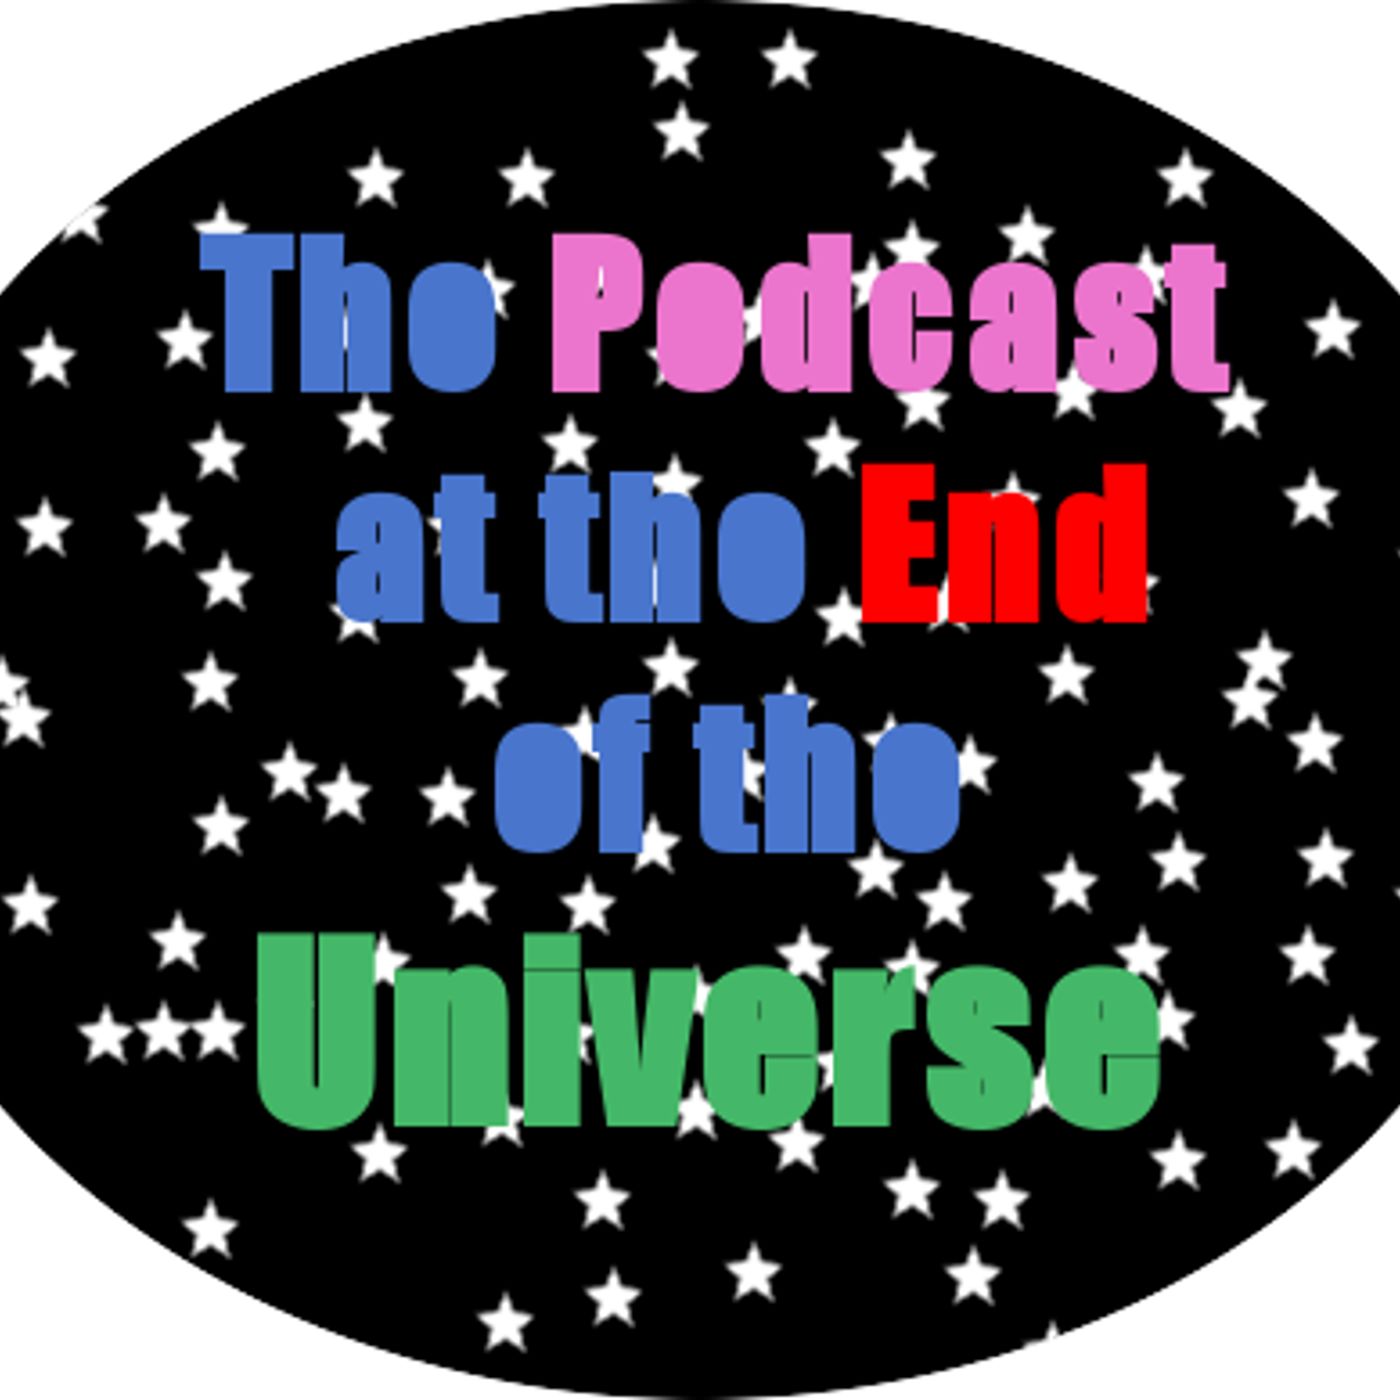 The Podcast at the End of the Universe